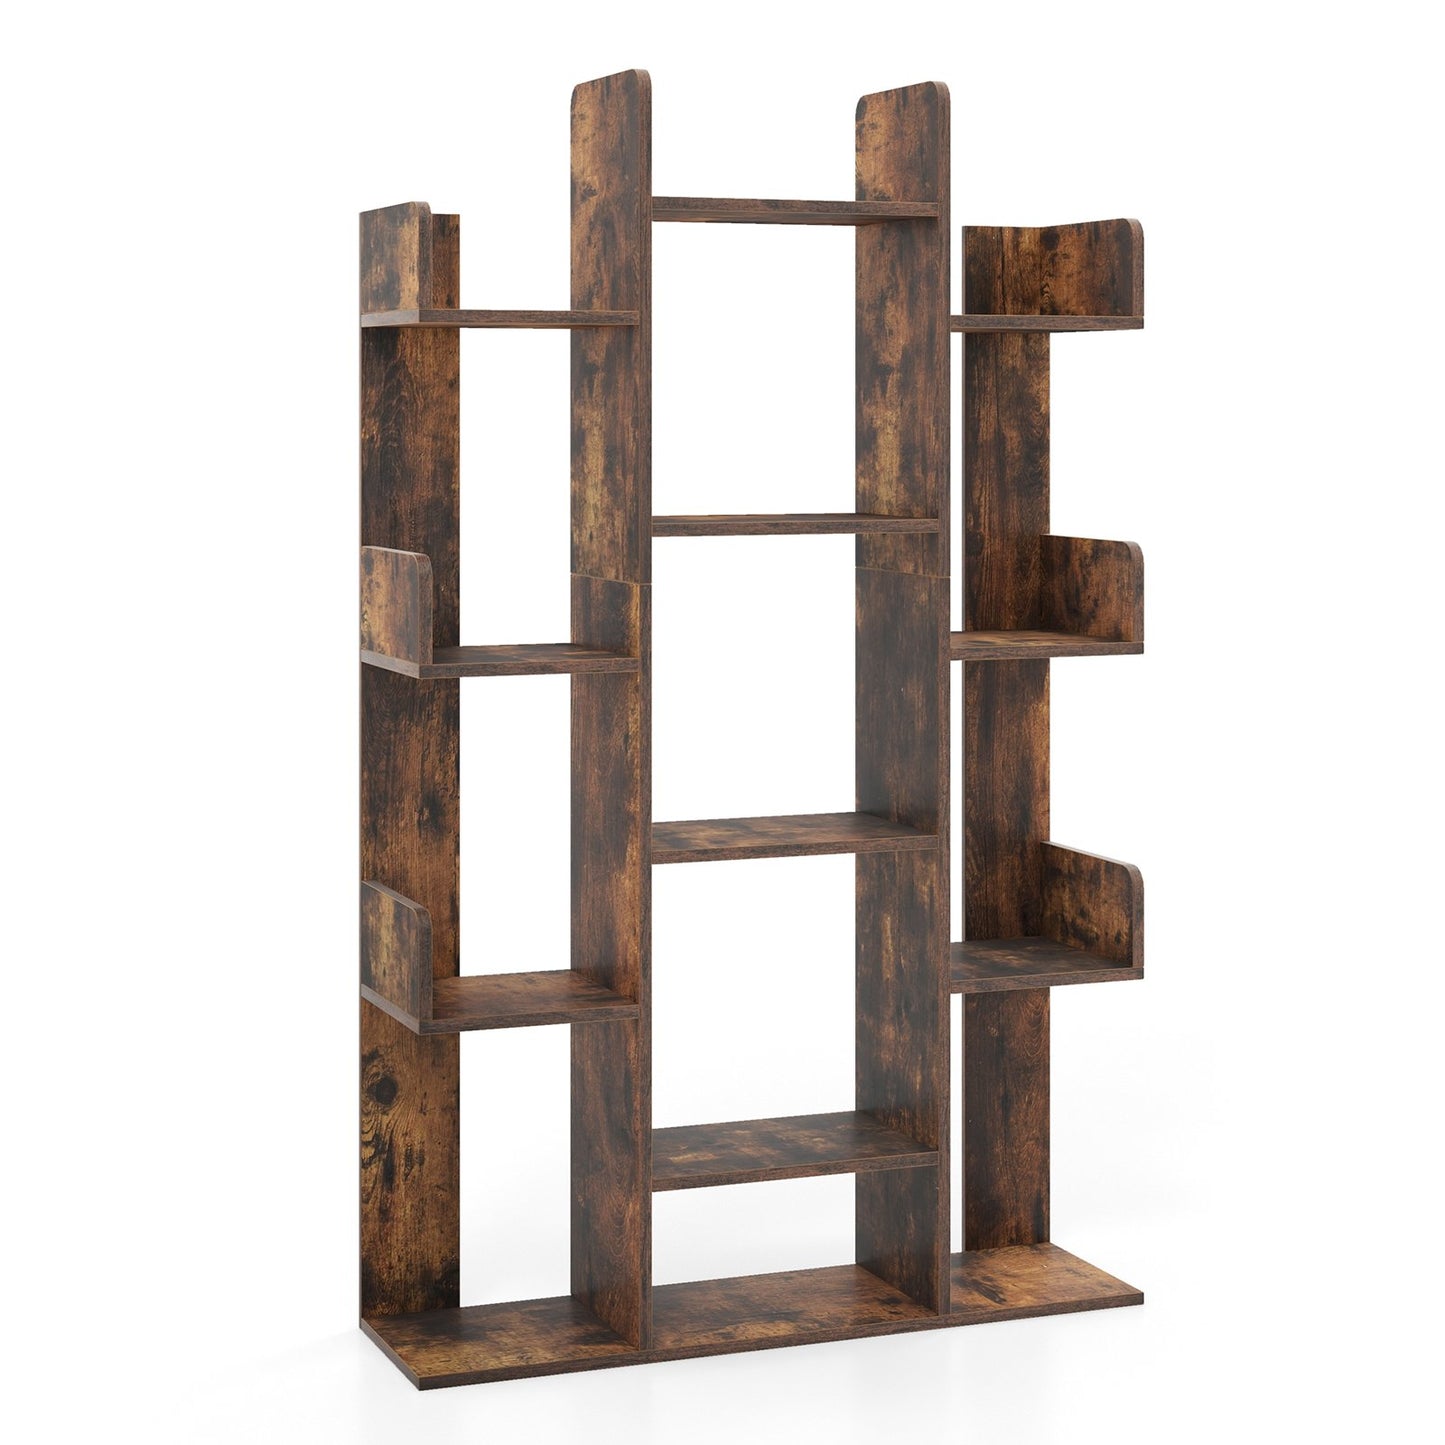 Tree-Shaped Bookshelf with 13 Compartments for Home Office, Rustic Brown